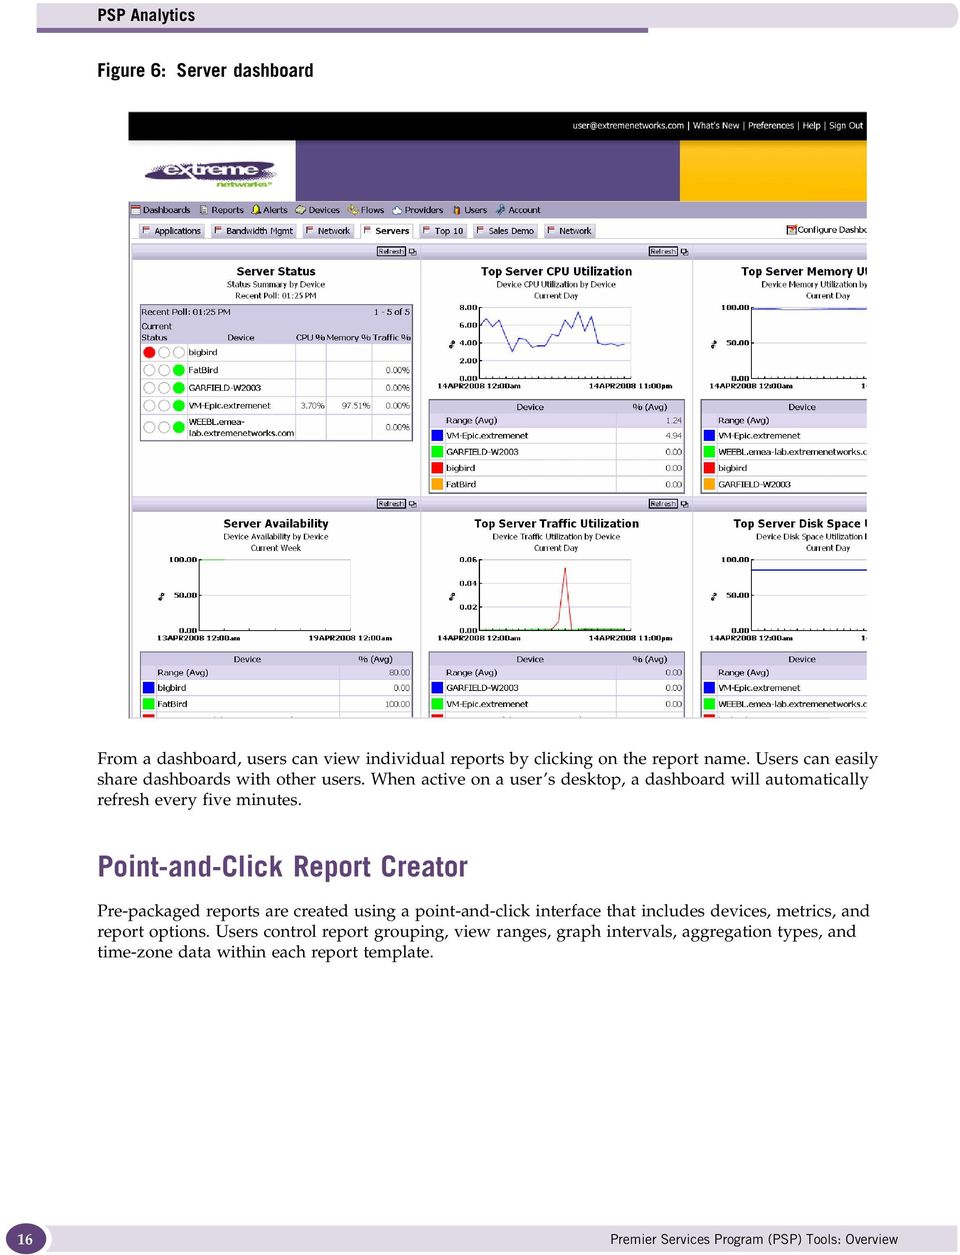 Point-and-Click Report Creator Pre-packaged reports are created using a point-and-click interface that includes devices, metrics, and report options.